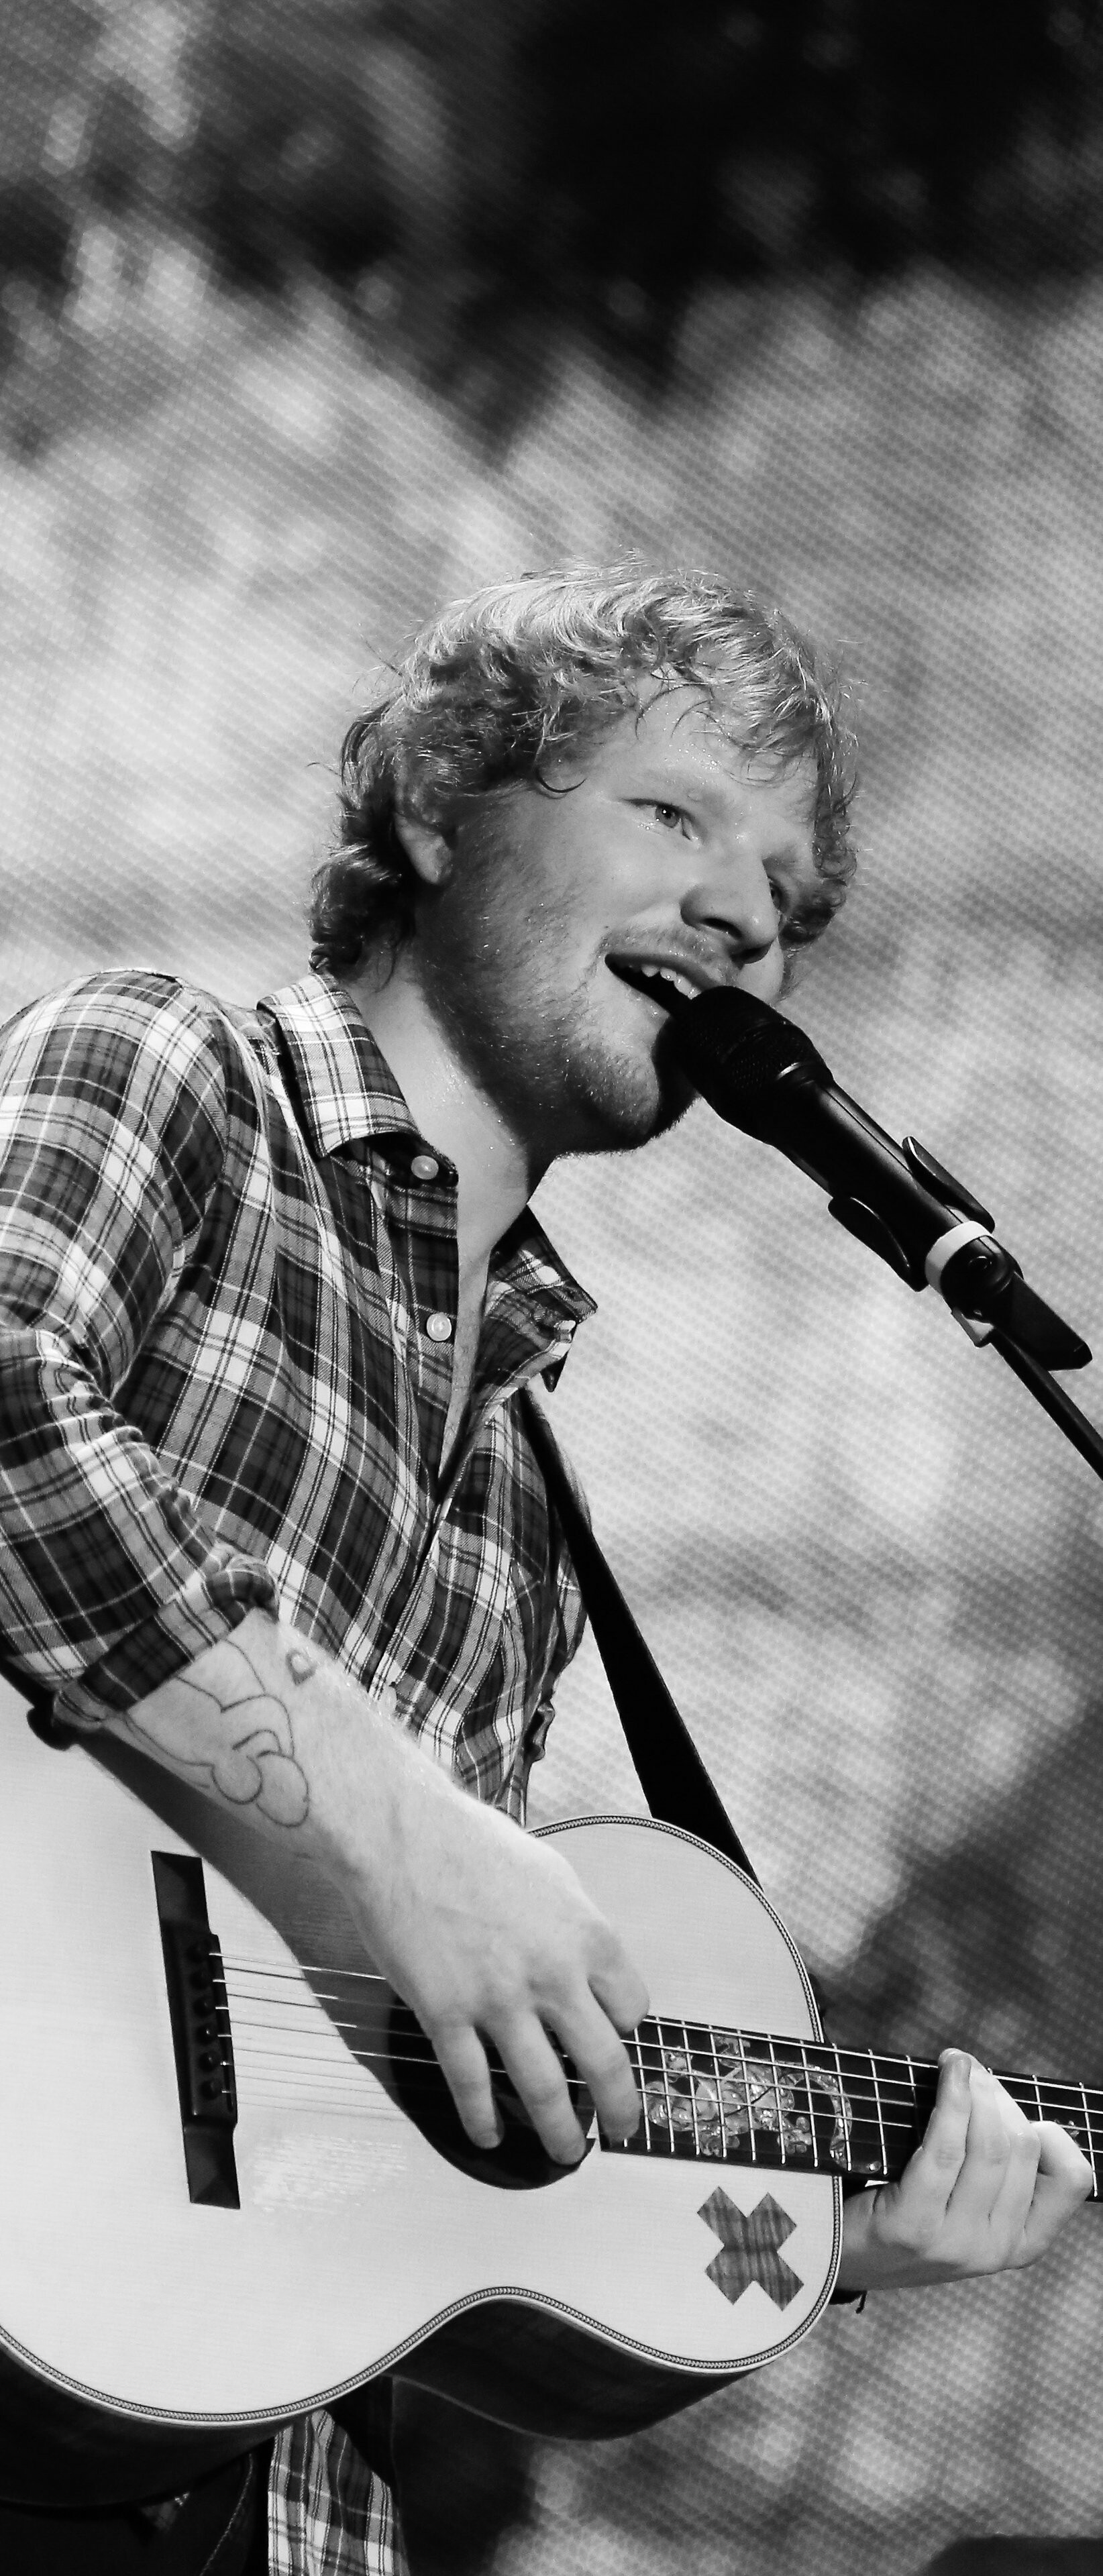 Ed Sheeran: The debut album, + (pronounced "plus"), was released in September 2011. 1650x3840 HD Background.